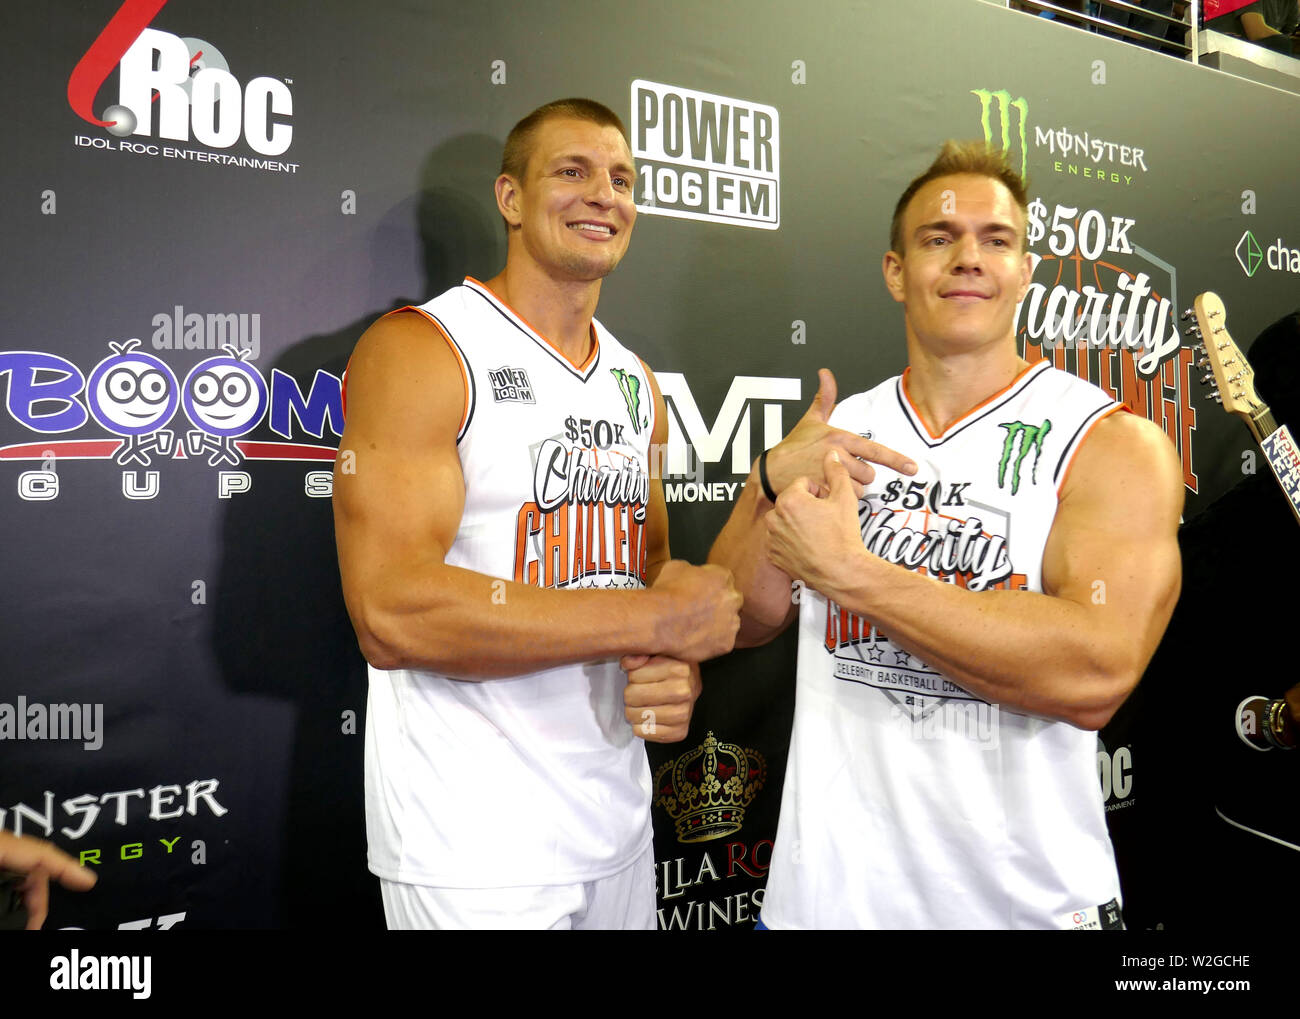 Los Angeles, California, USA 8th July 2019 Football Player/Super Bowl Champ Rob  Gronkowski and brother Chris Gronkowski attend the 2nd Annual Monster  Energy $50K Charity Challenge Celebrity Basketball Game on July 8,